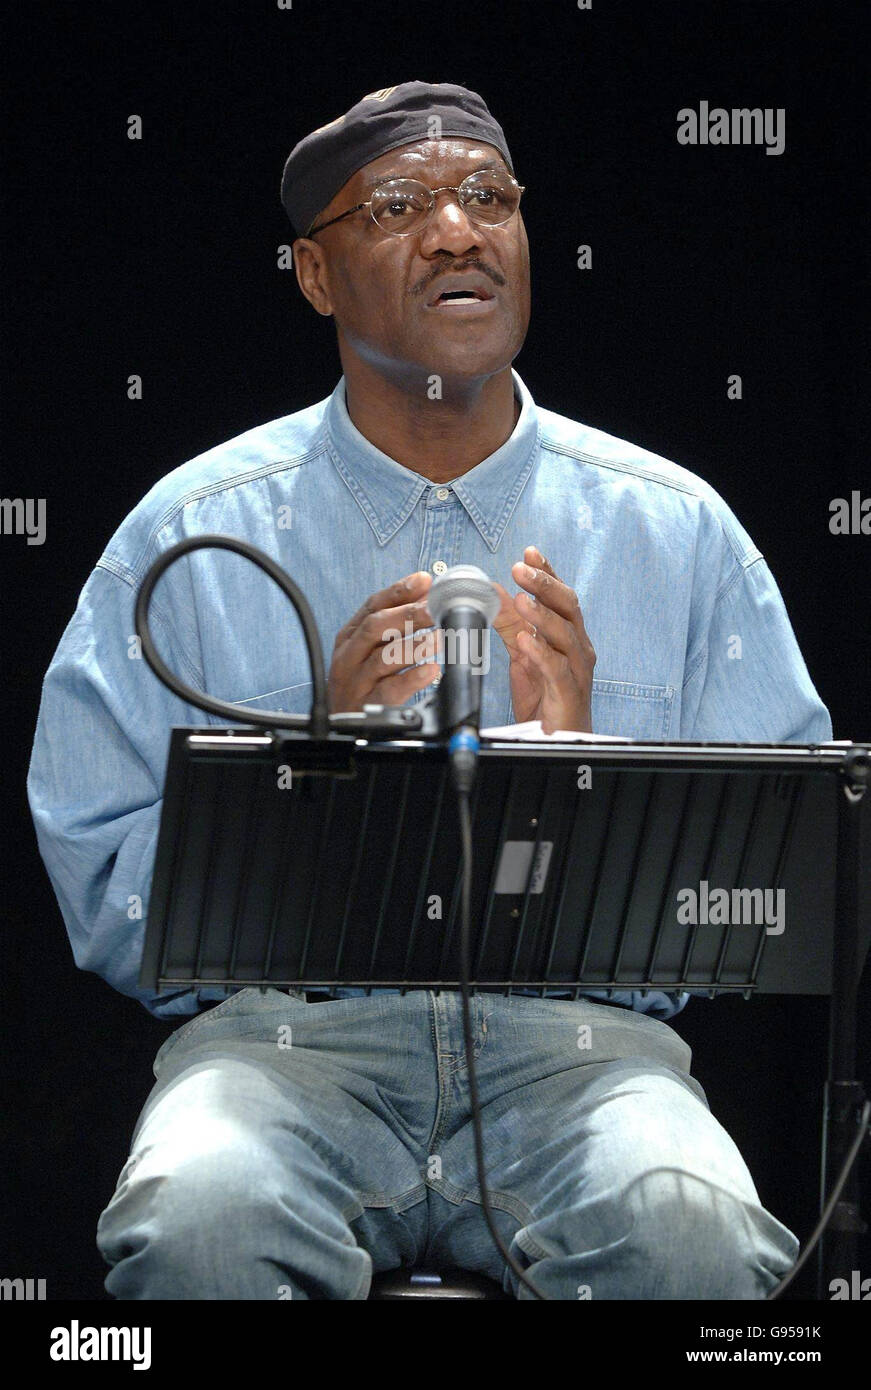 Delroy Lindo during a photocall for his new play 'The Exonerated', at the Riverside Studios, Hammersmith, west London, Friday 24 February 2006. PRESS ASSOCIATION Photo. Photo credit should read: Ian West/PA Stock Photo